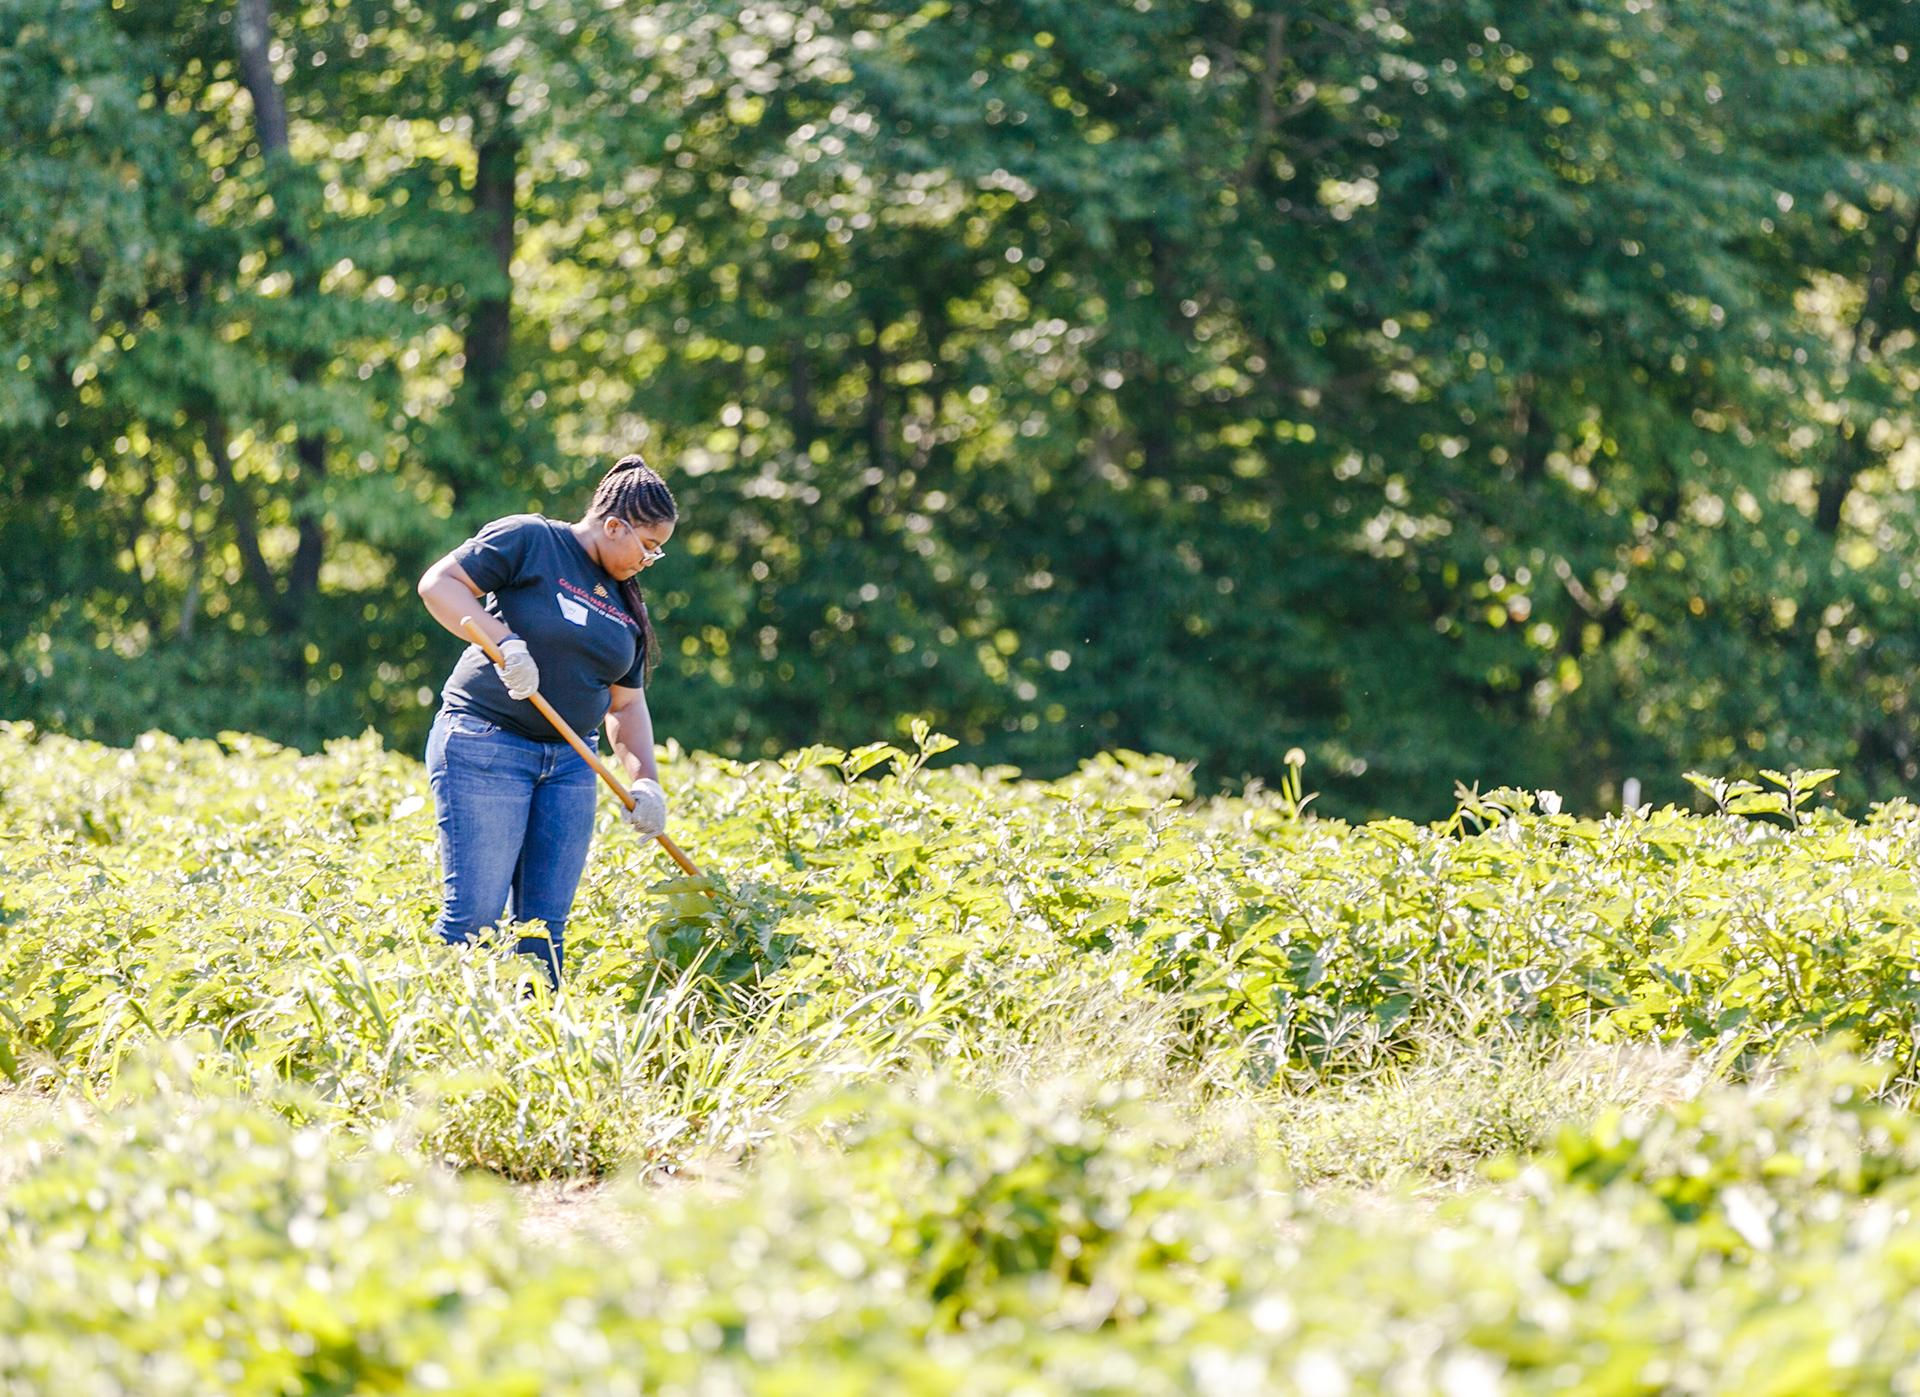 Student in the middle of a green field using a raking tool